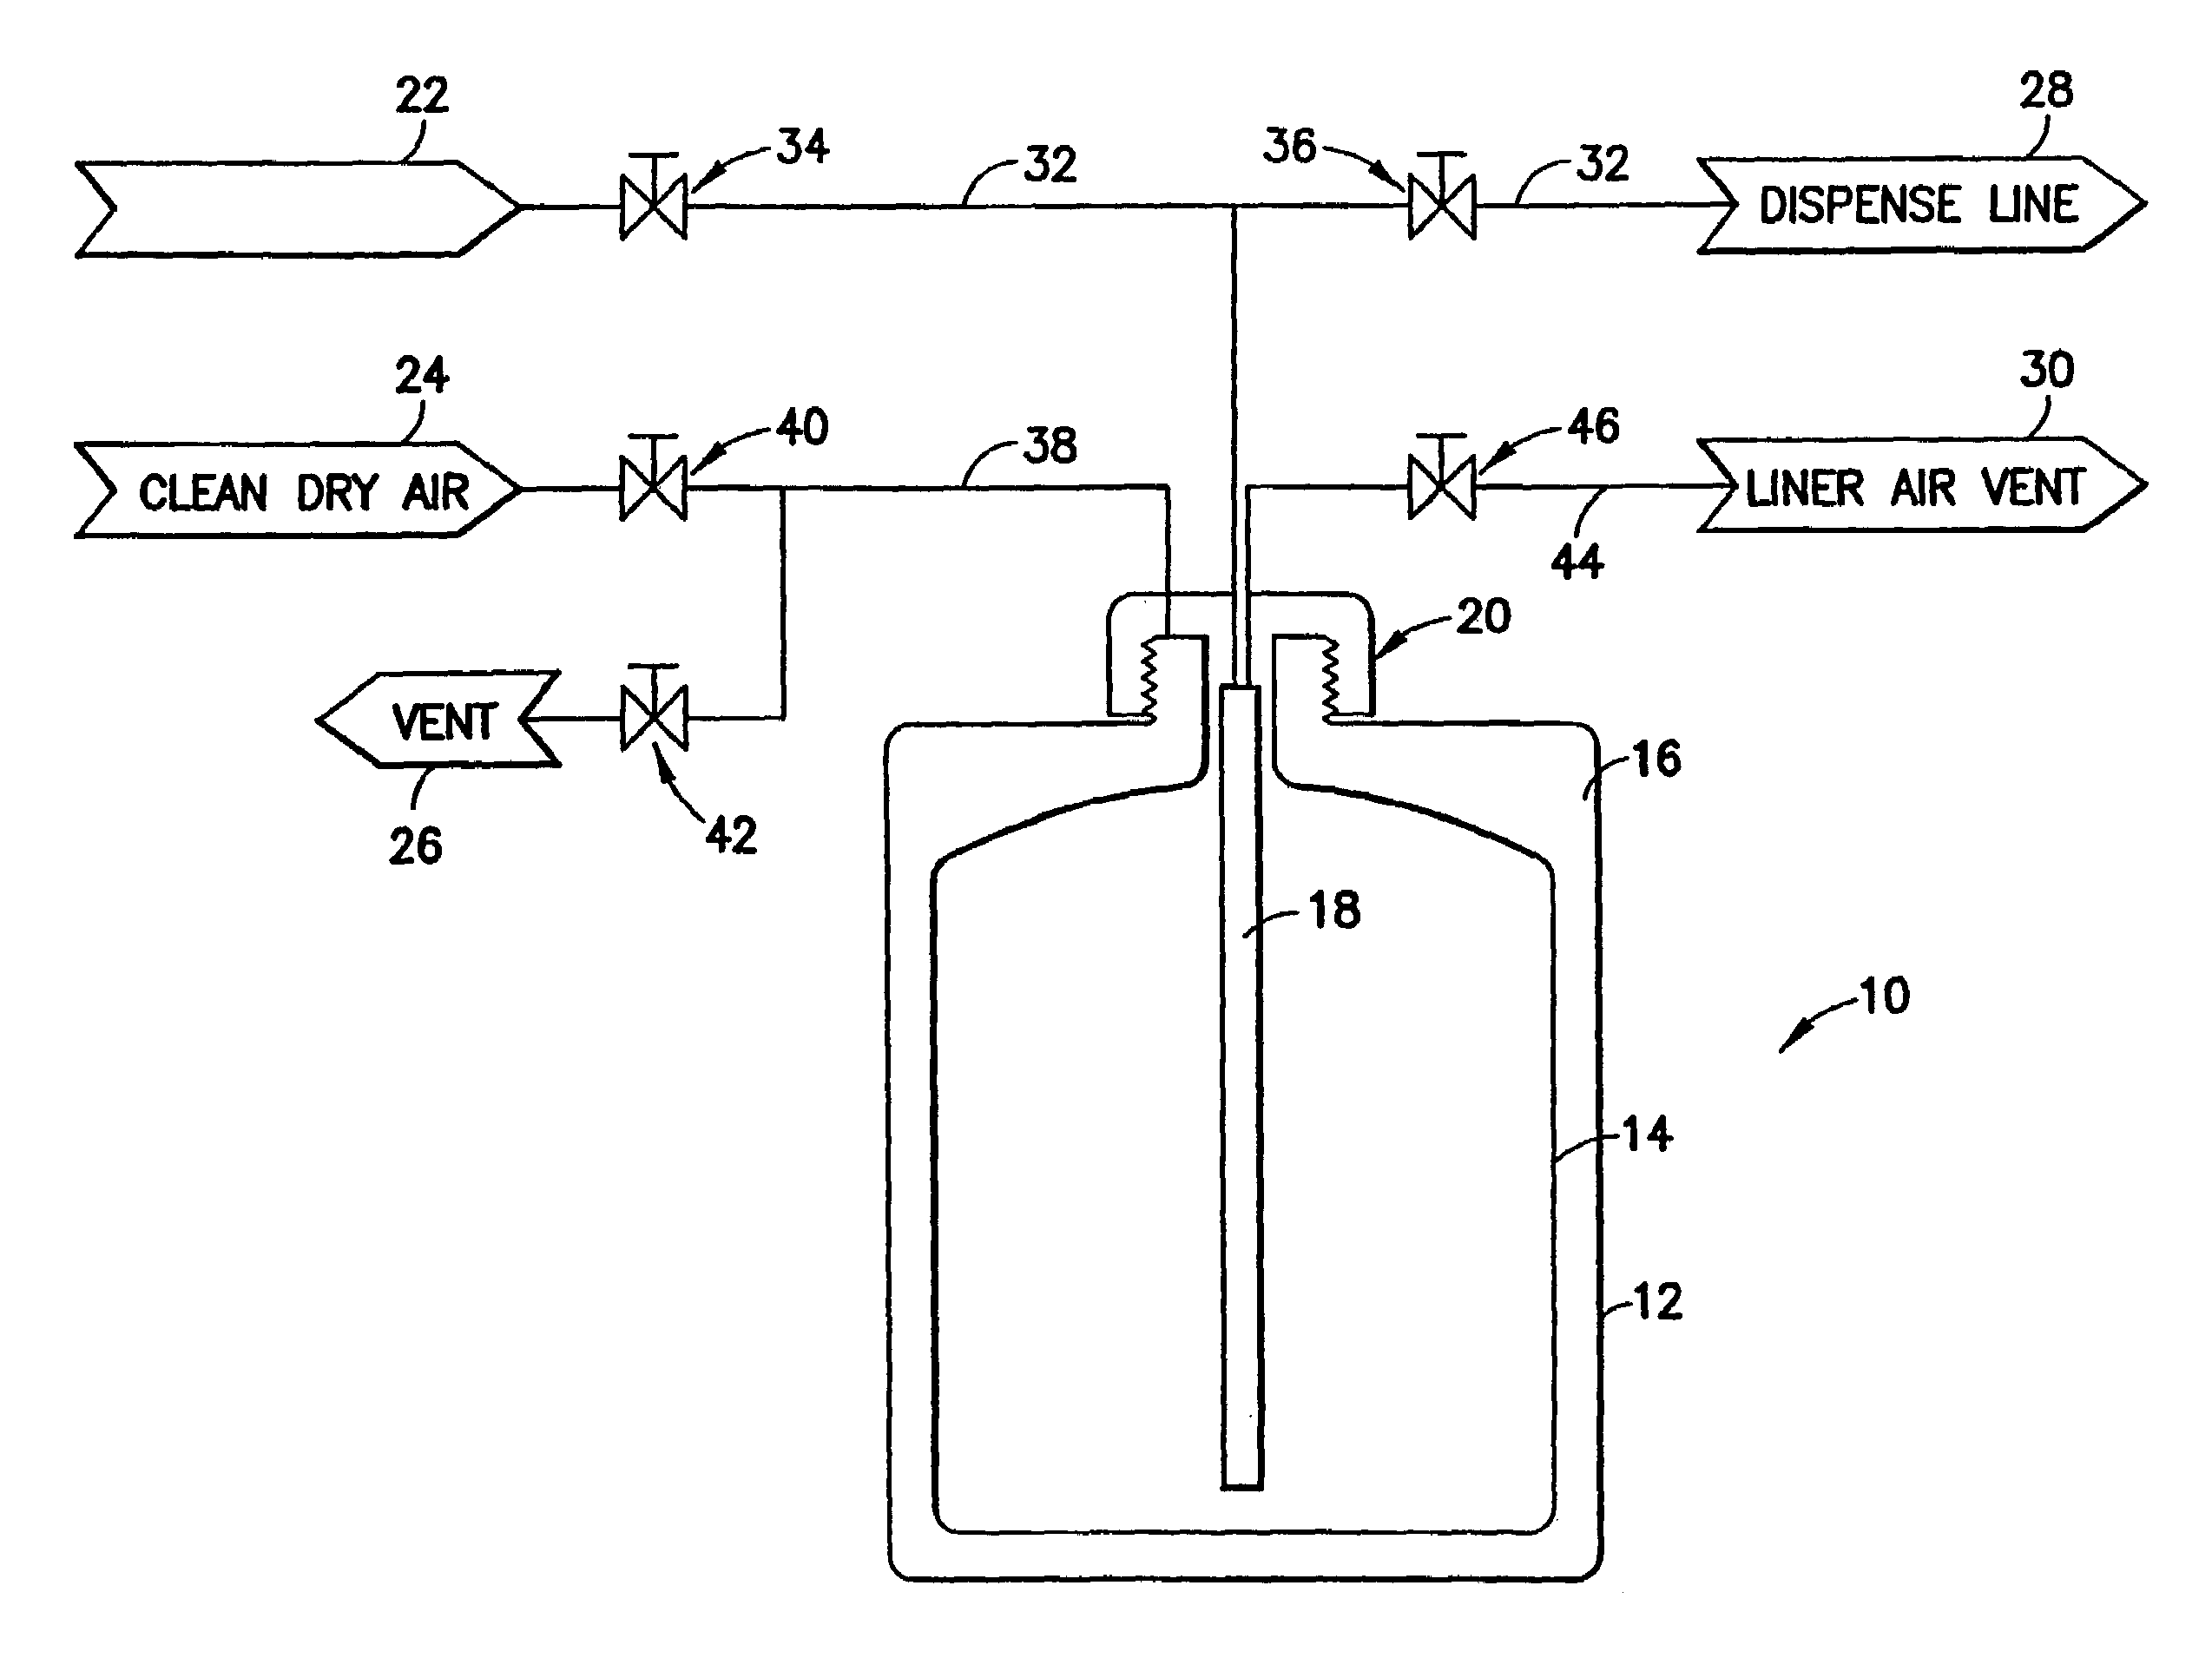 Apparatus and method for minimizing the generation of particles in ultrapure liquids